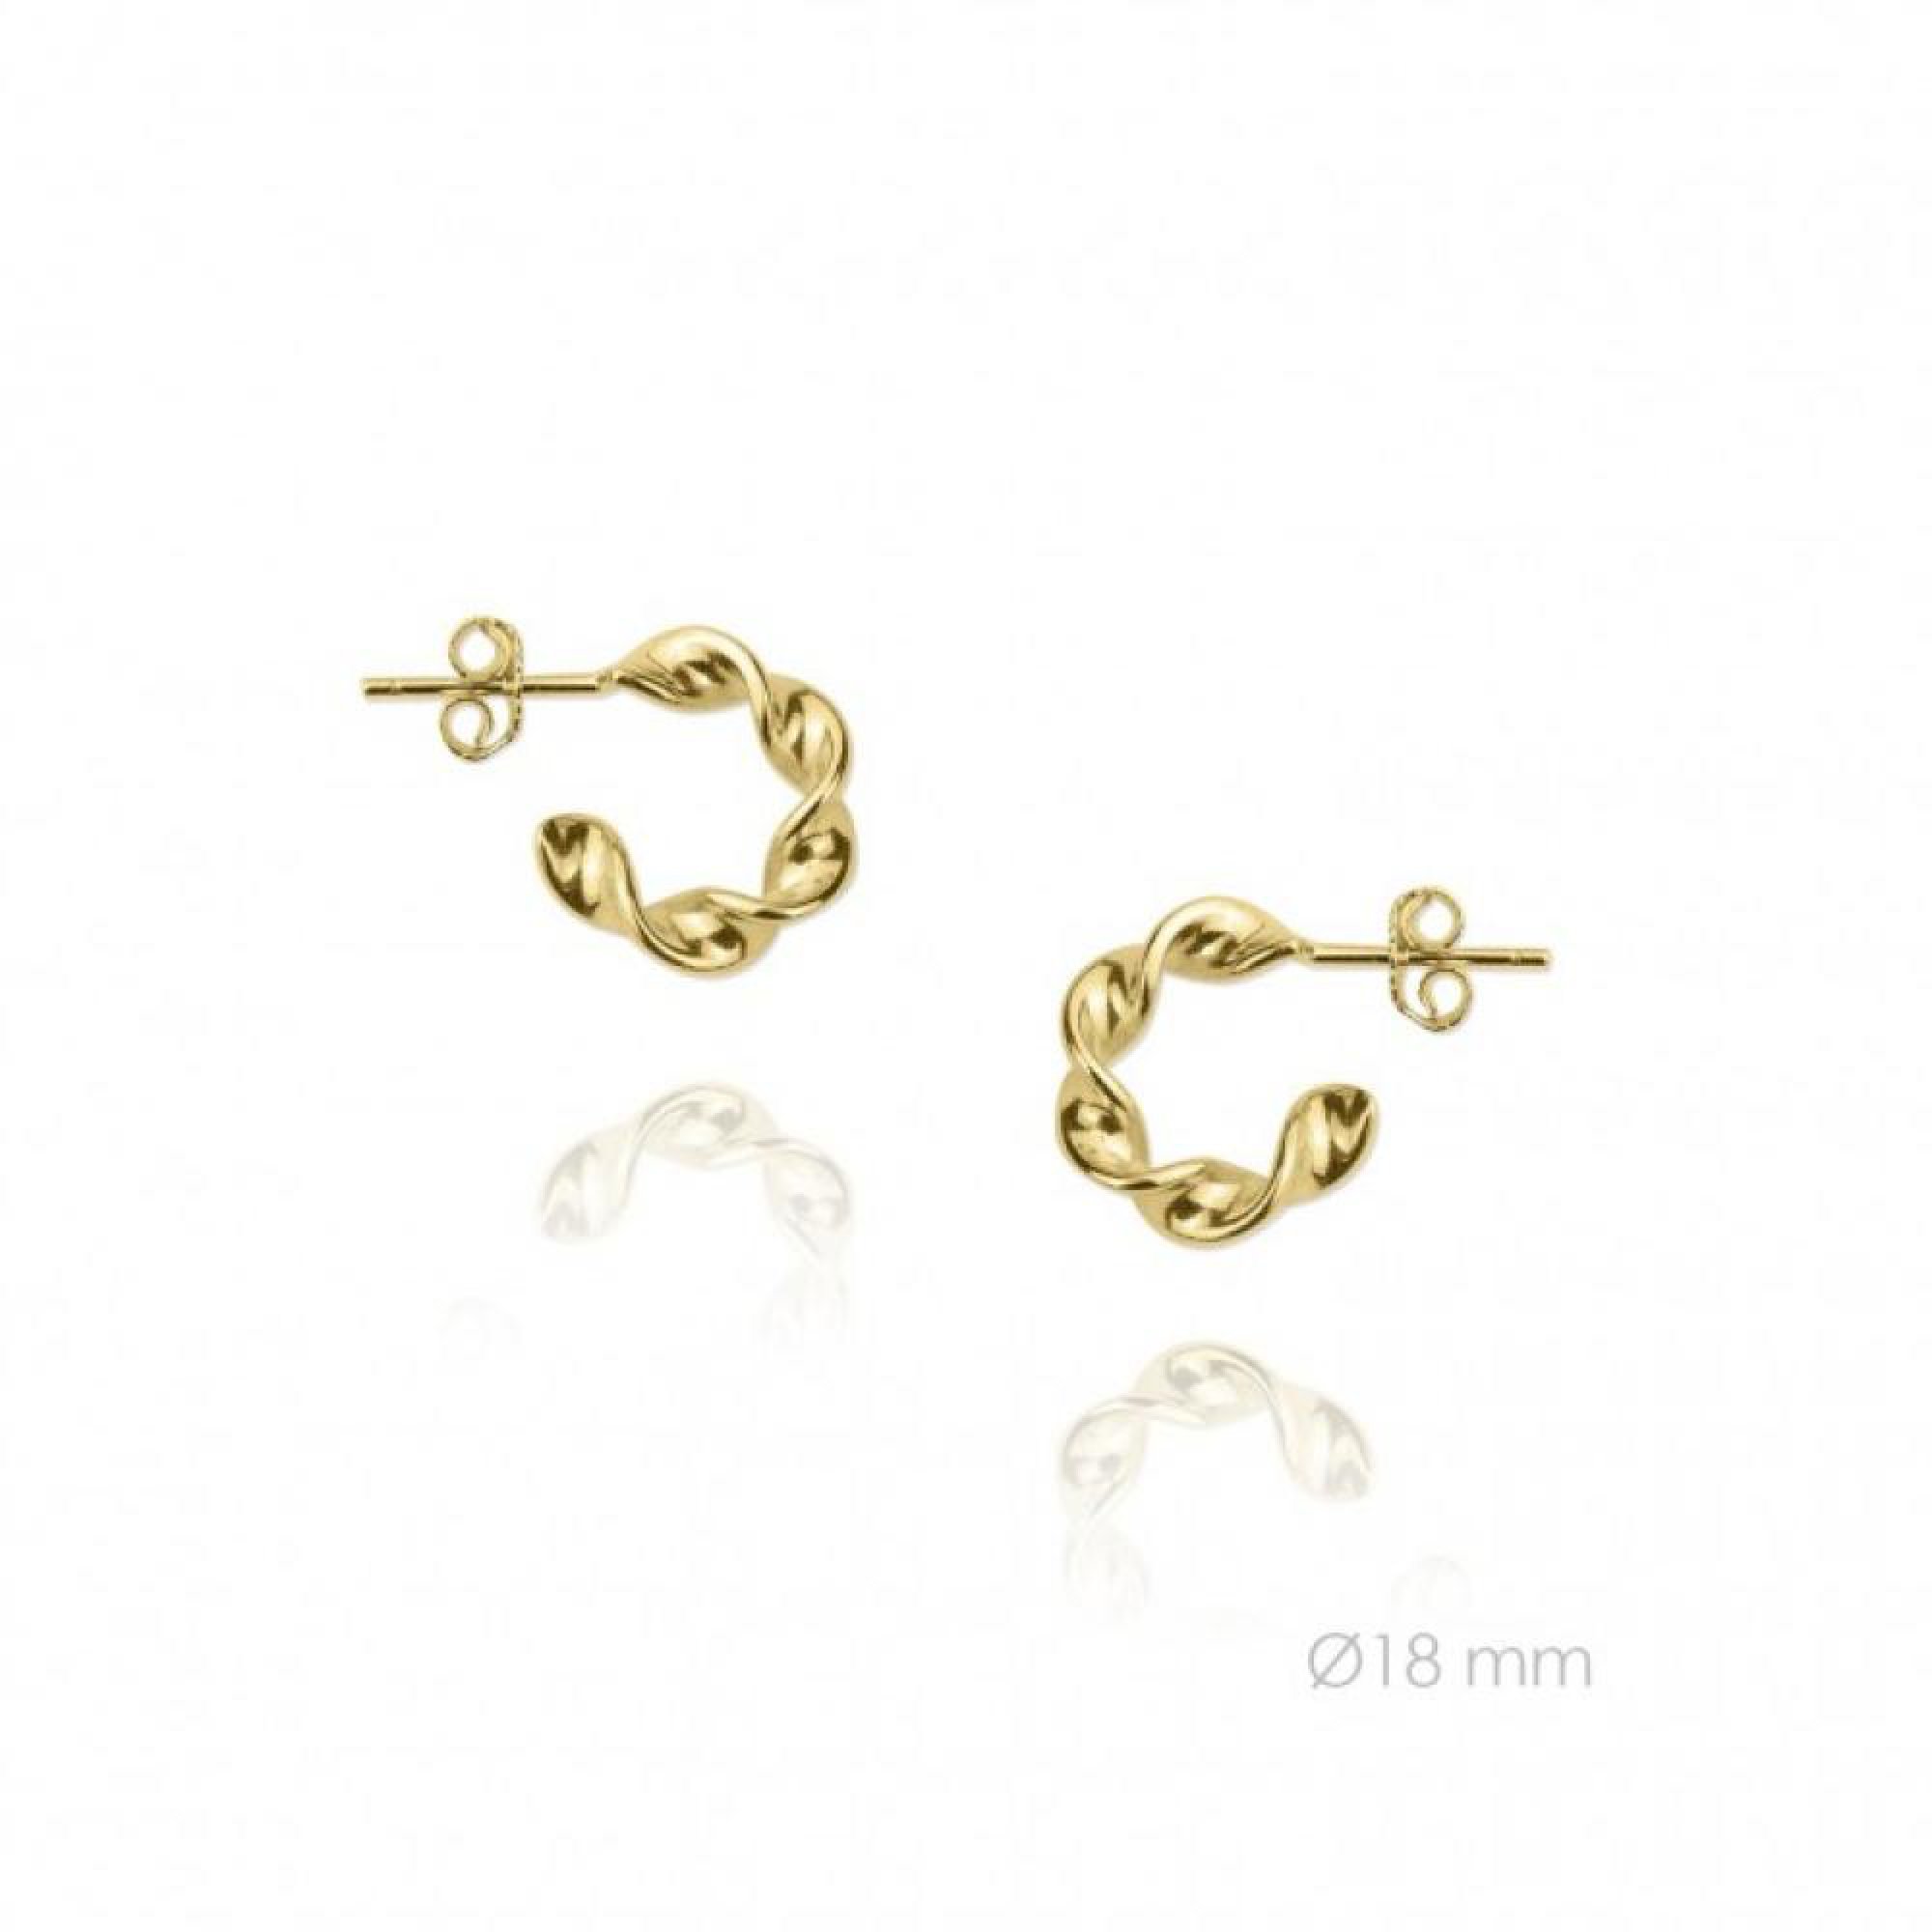 Gold plated twisted earrings